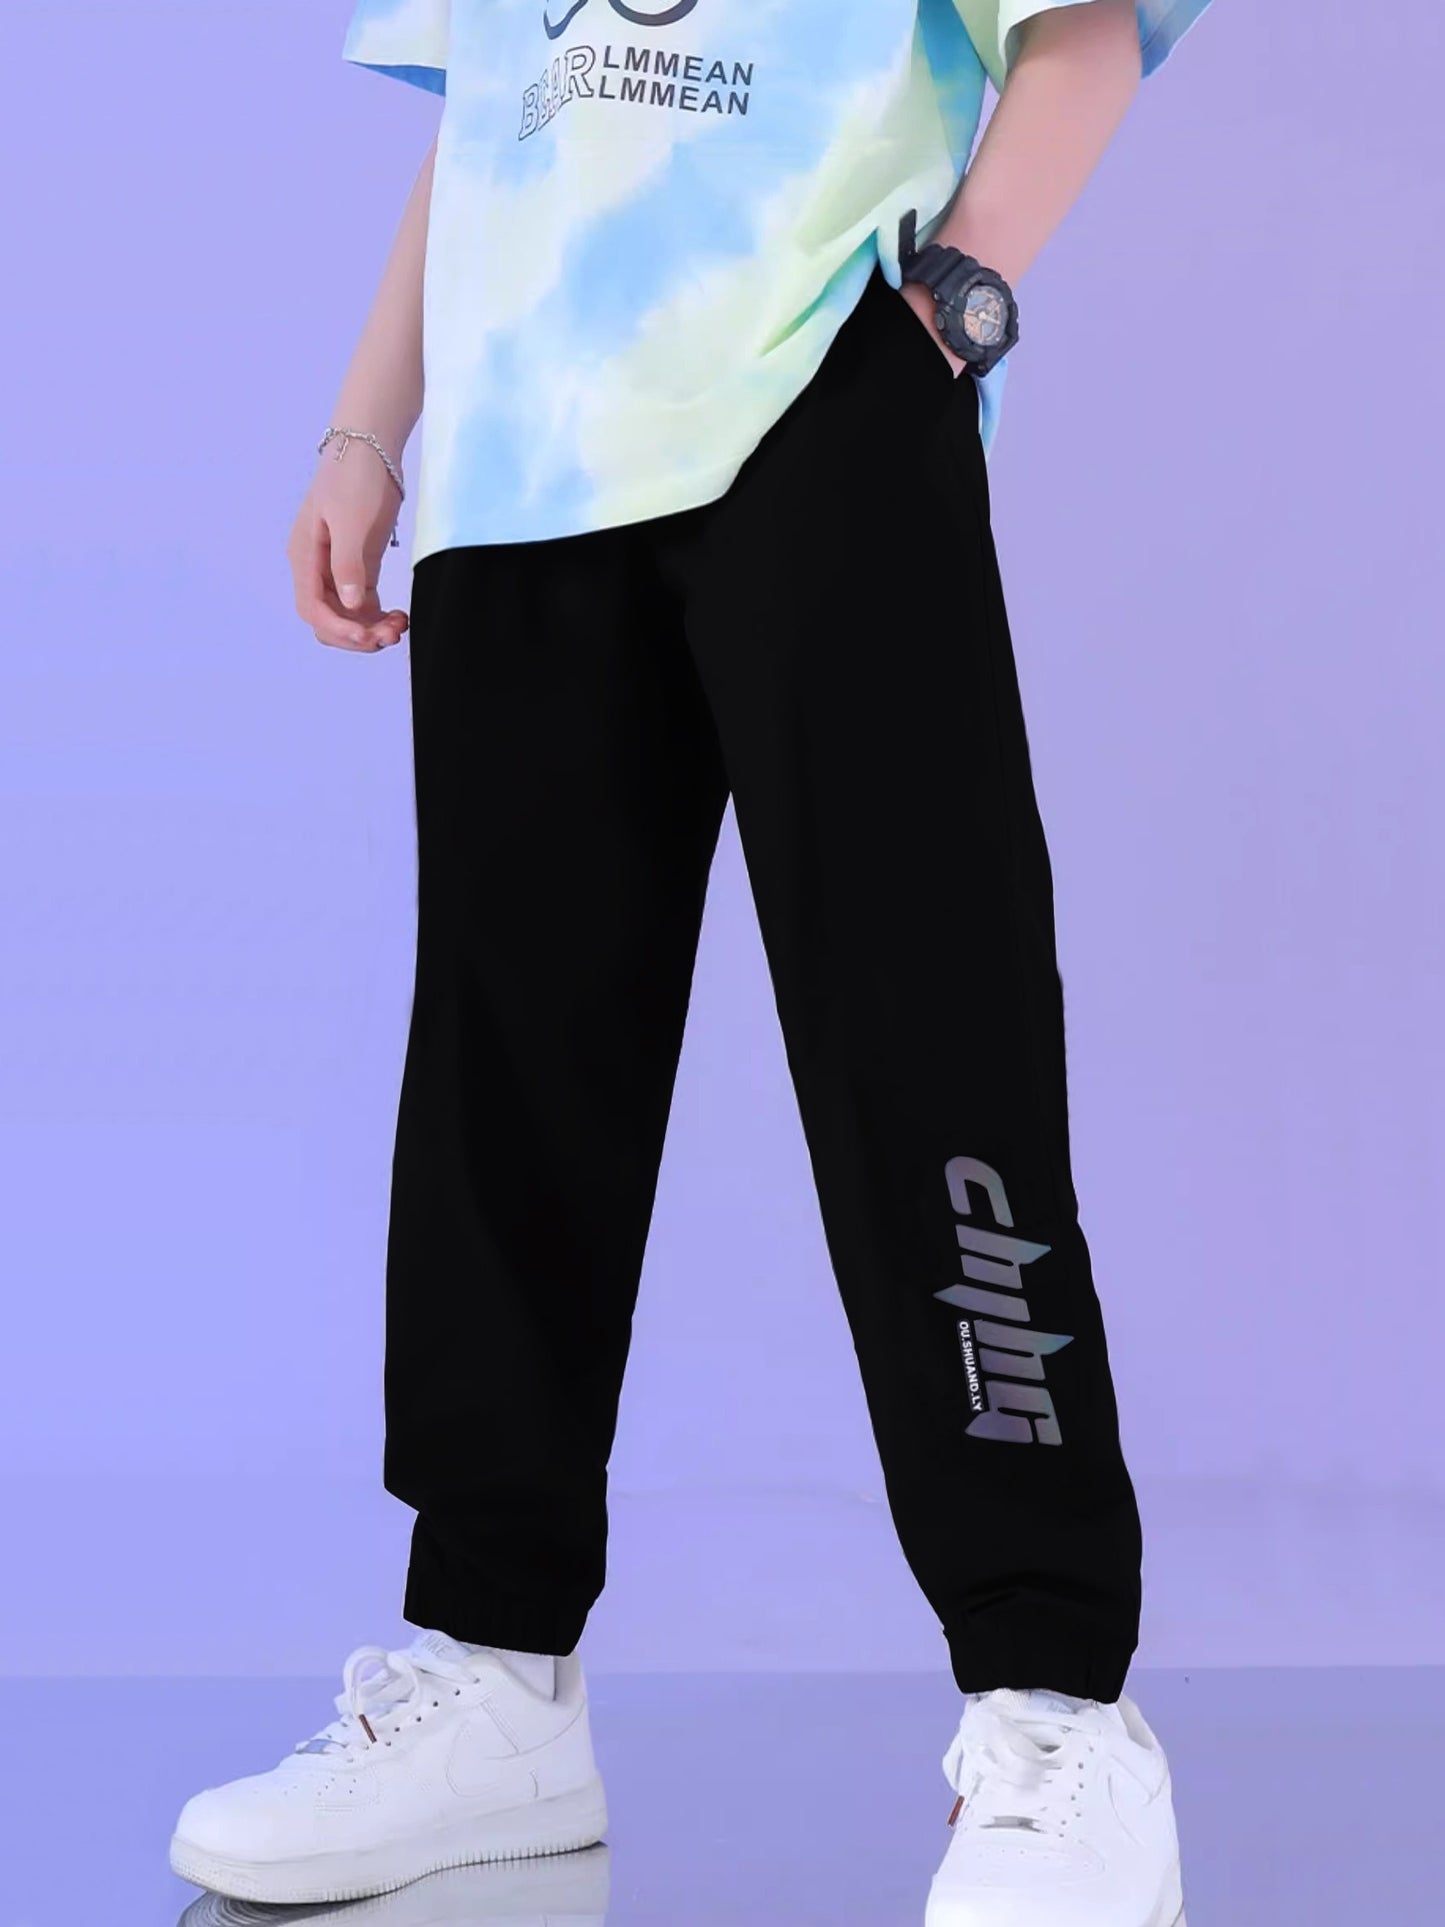 Stylish Letter Print Boys Casual Comfortable Active Sweatpants, Breathable Jogger Sports Pants, Kids Clothes Outdoor